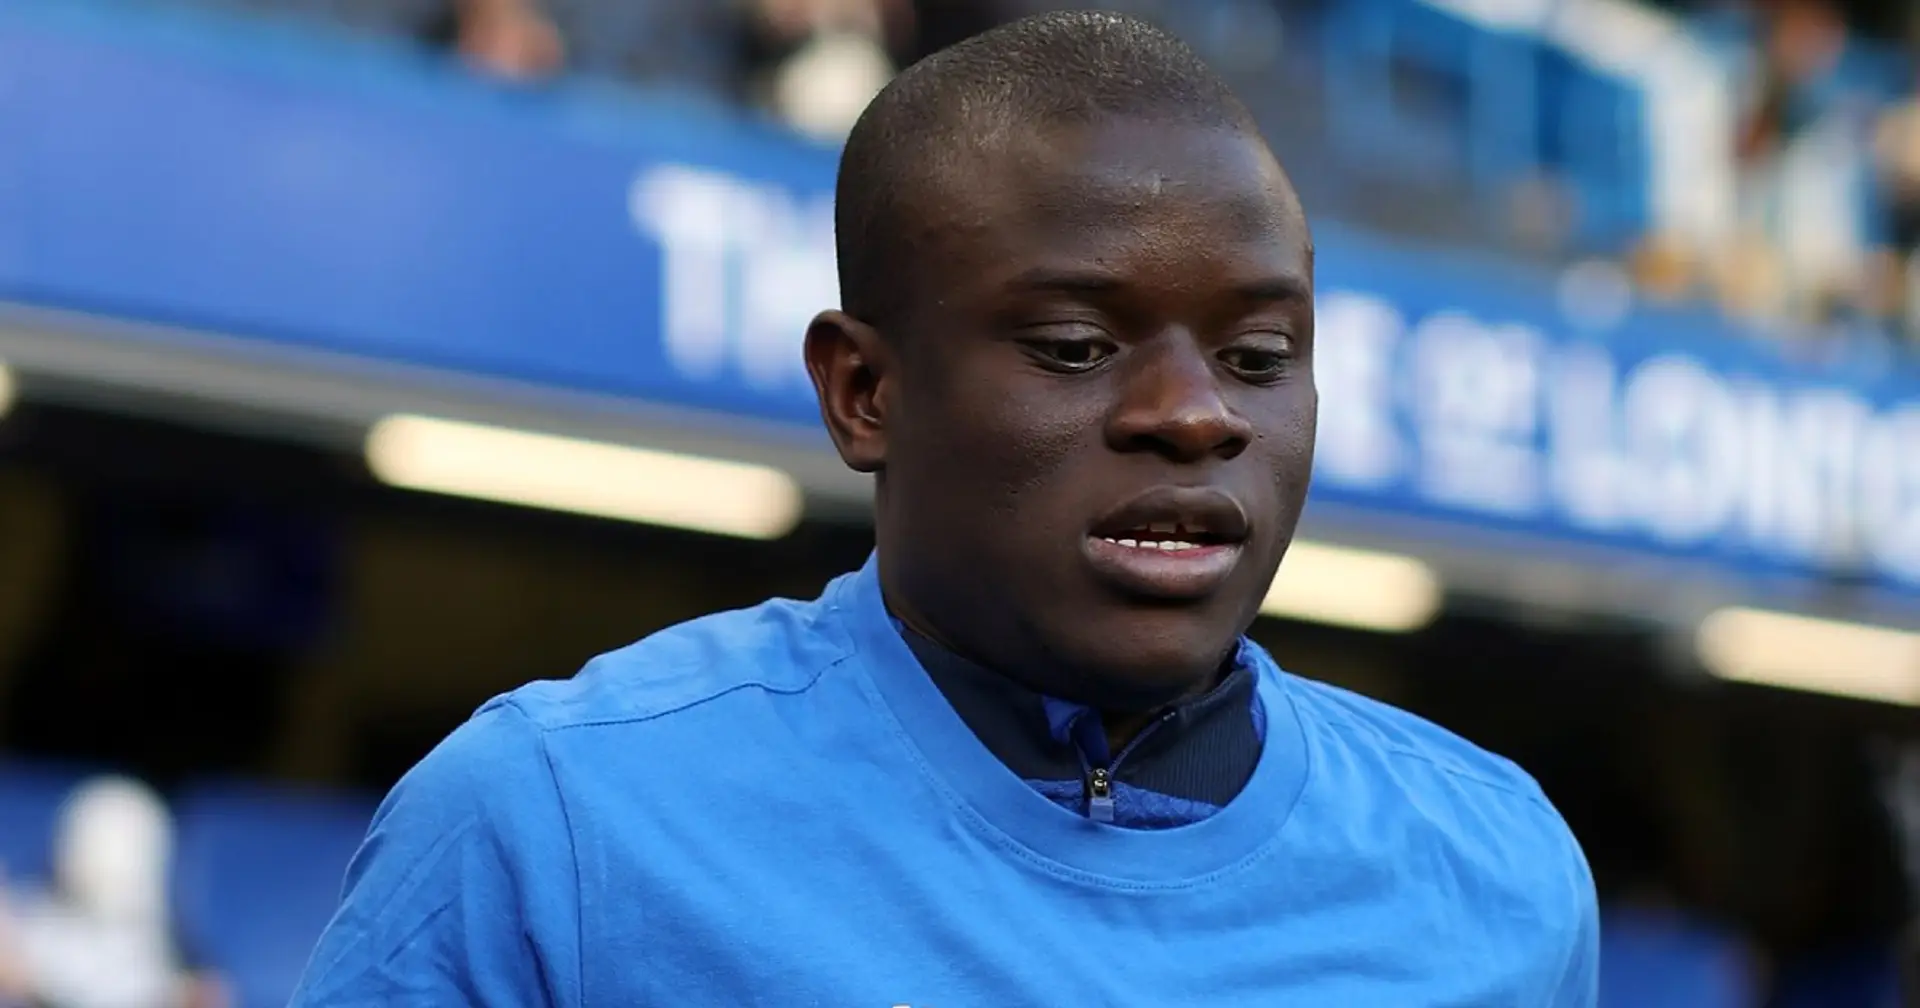 Kante to play first game since August: team news for Chelsea vs Aston Villa, probable lineups